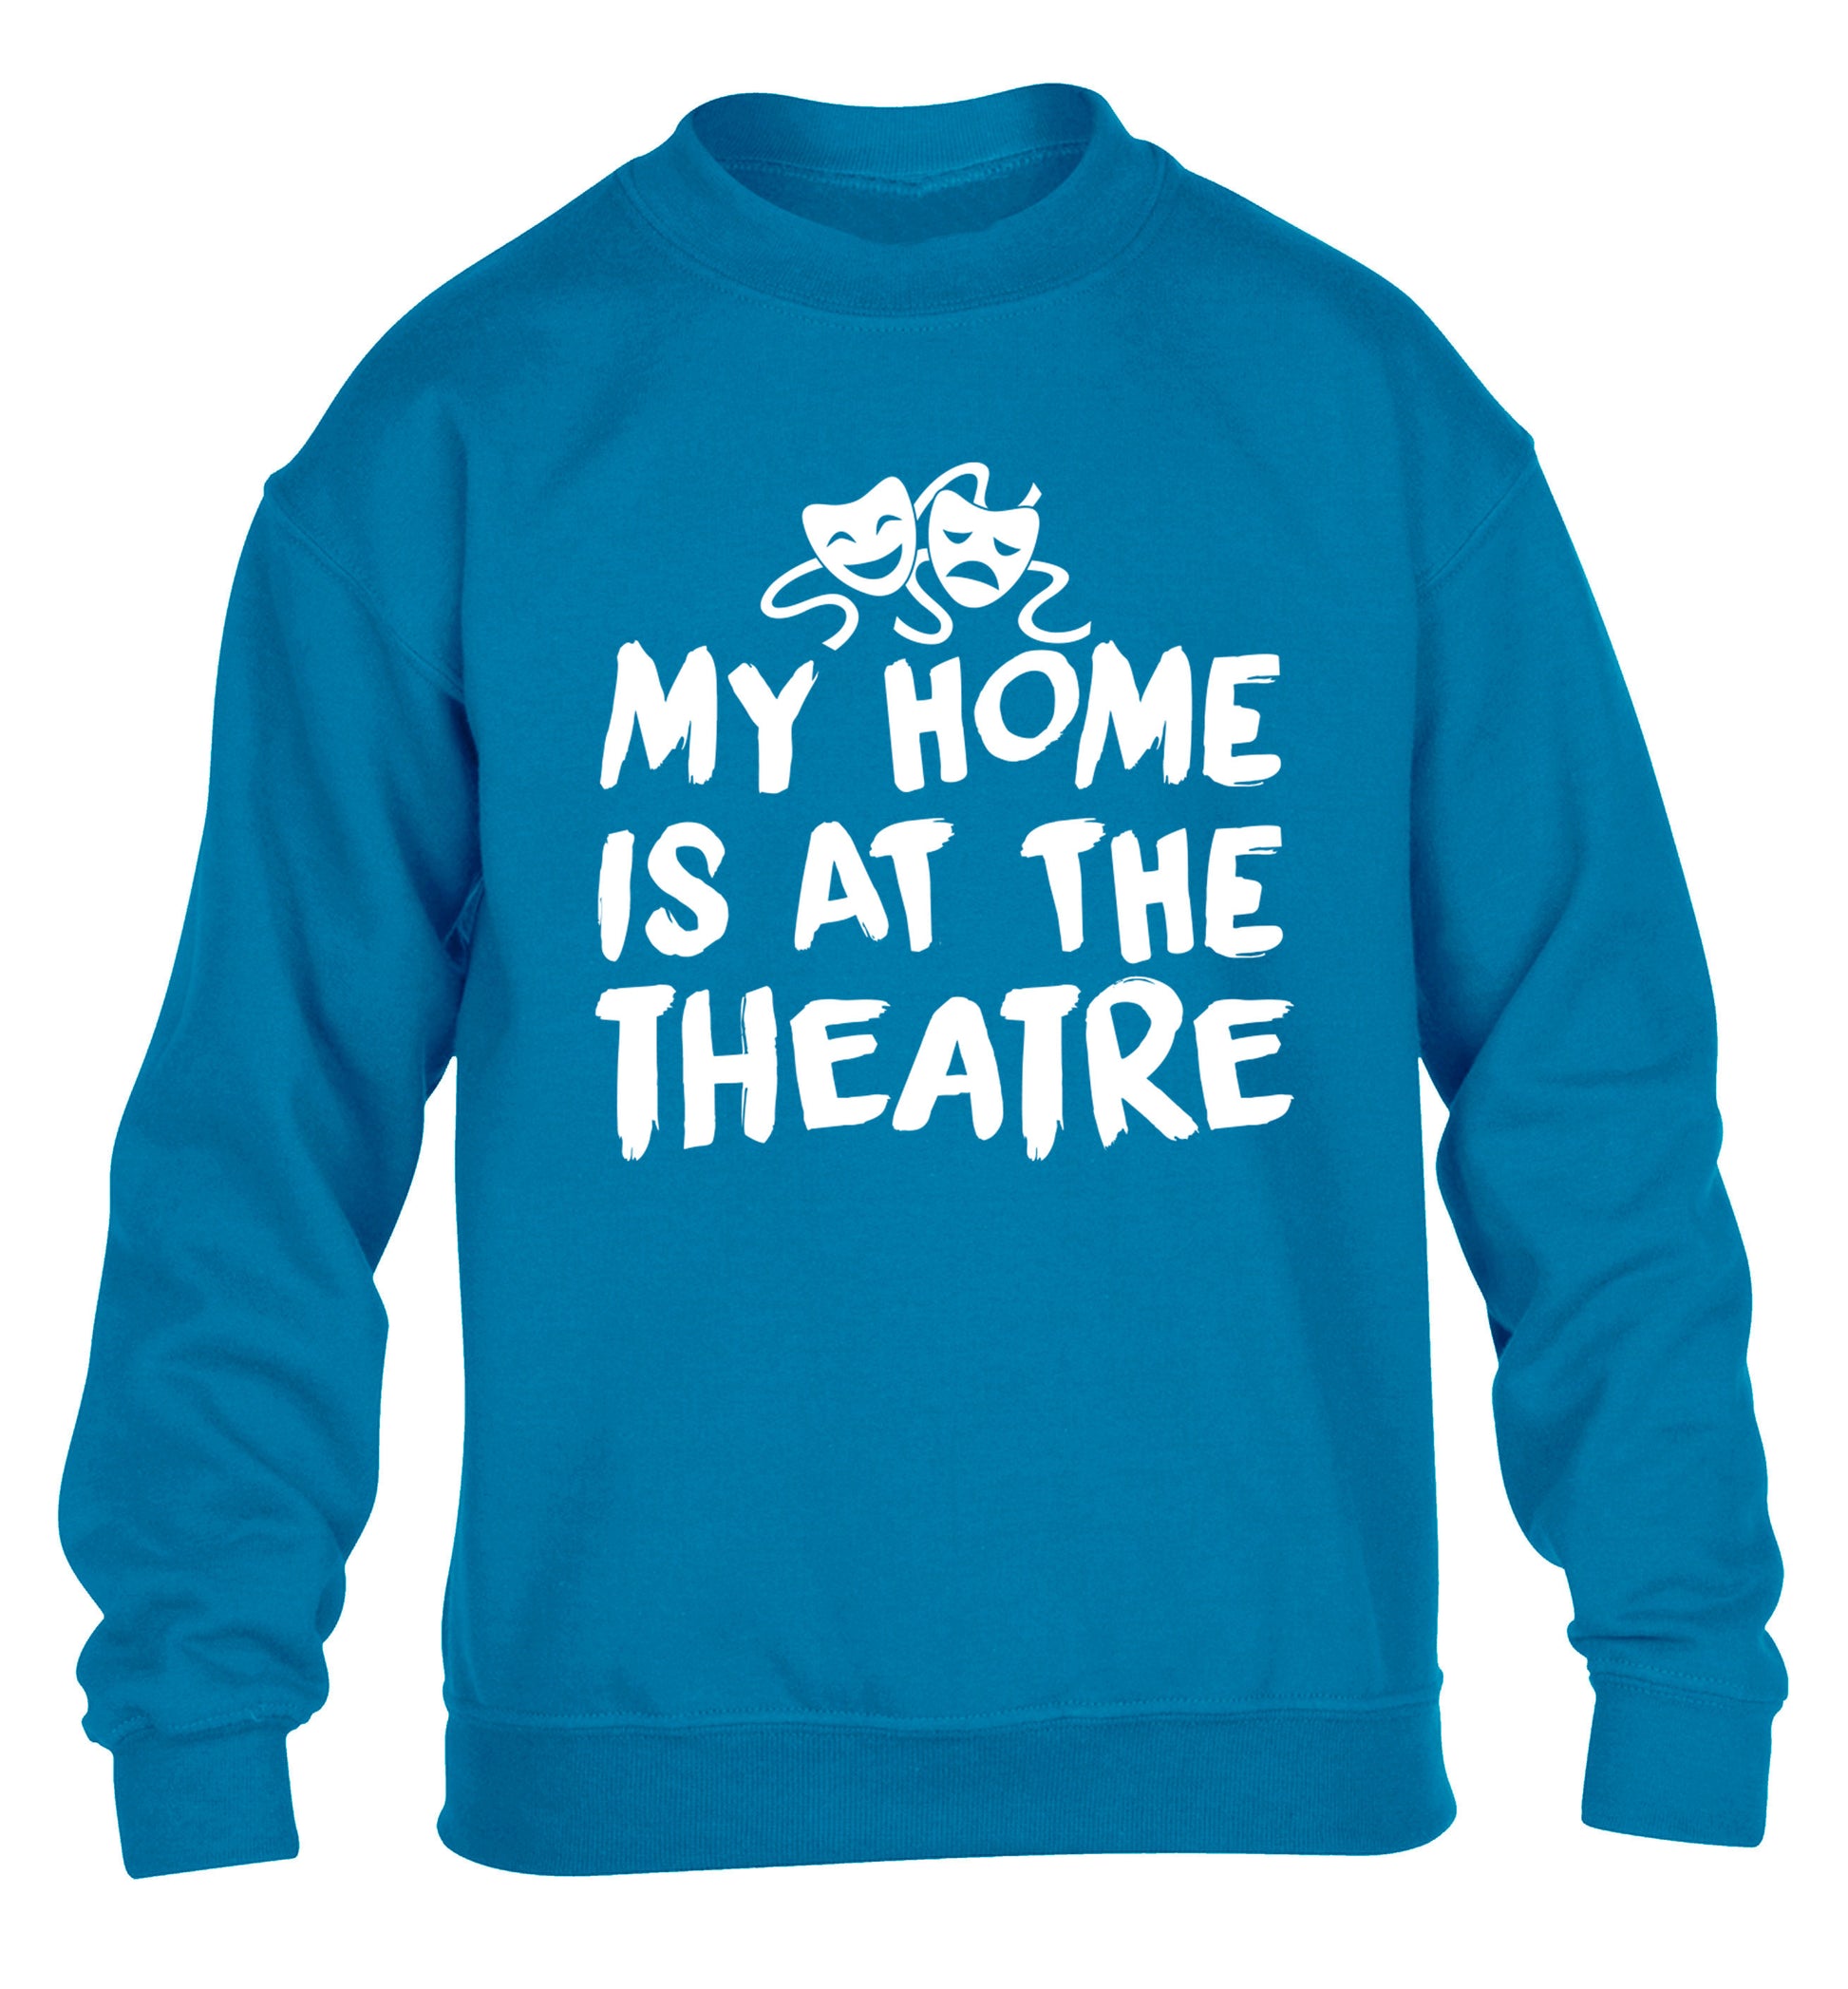 My home is at the theatre children's blue sweater 12-14 Years